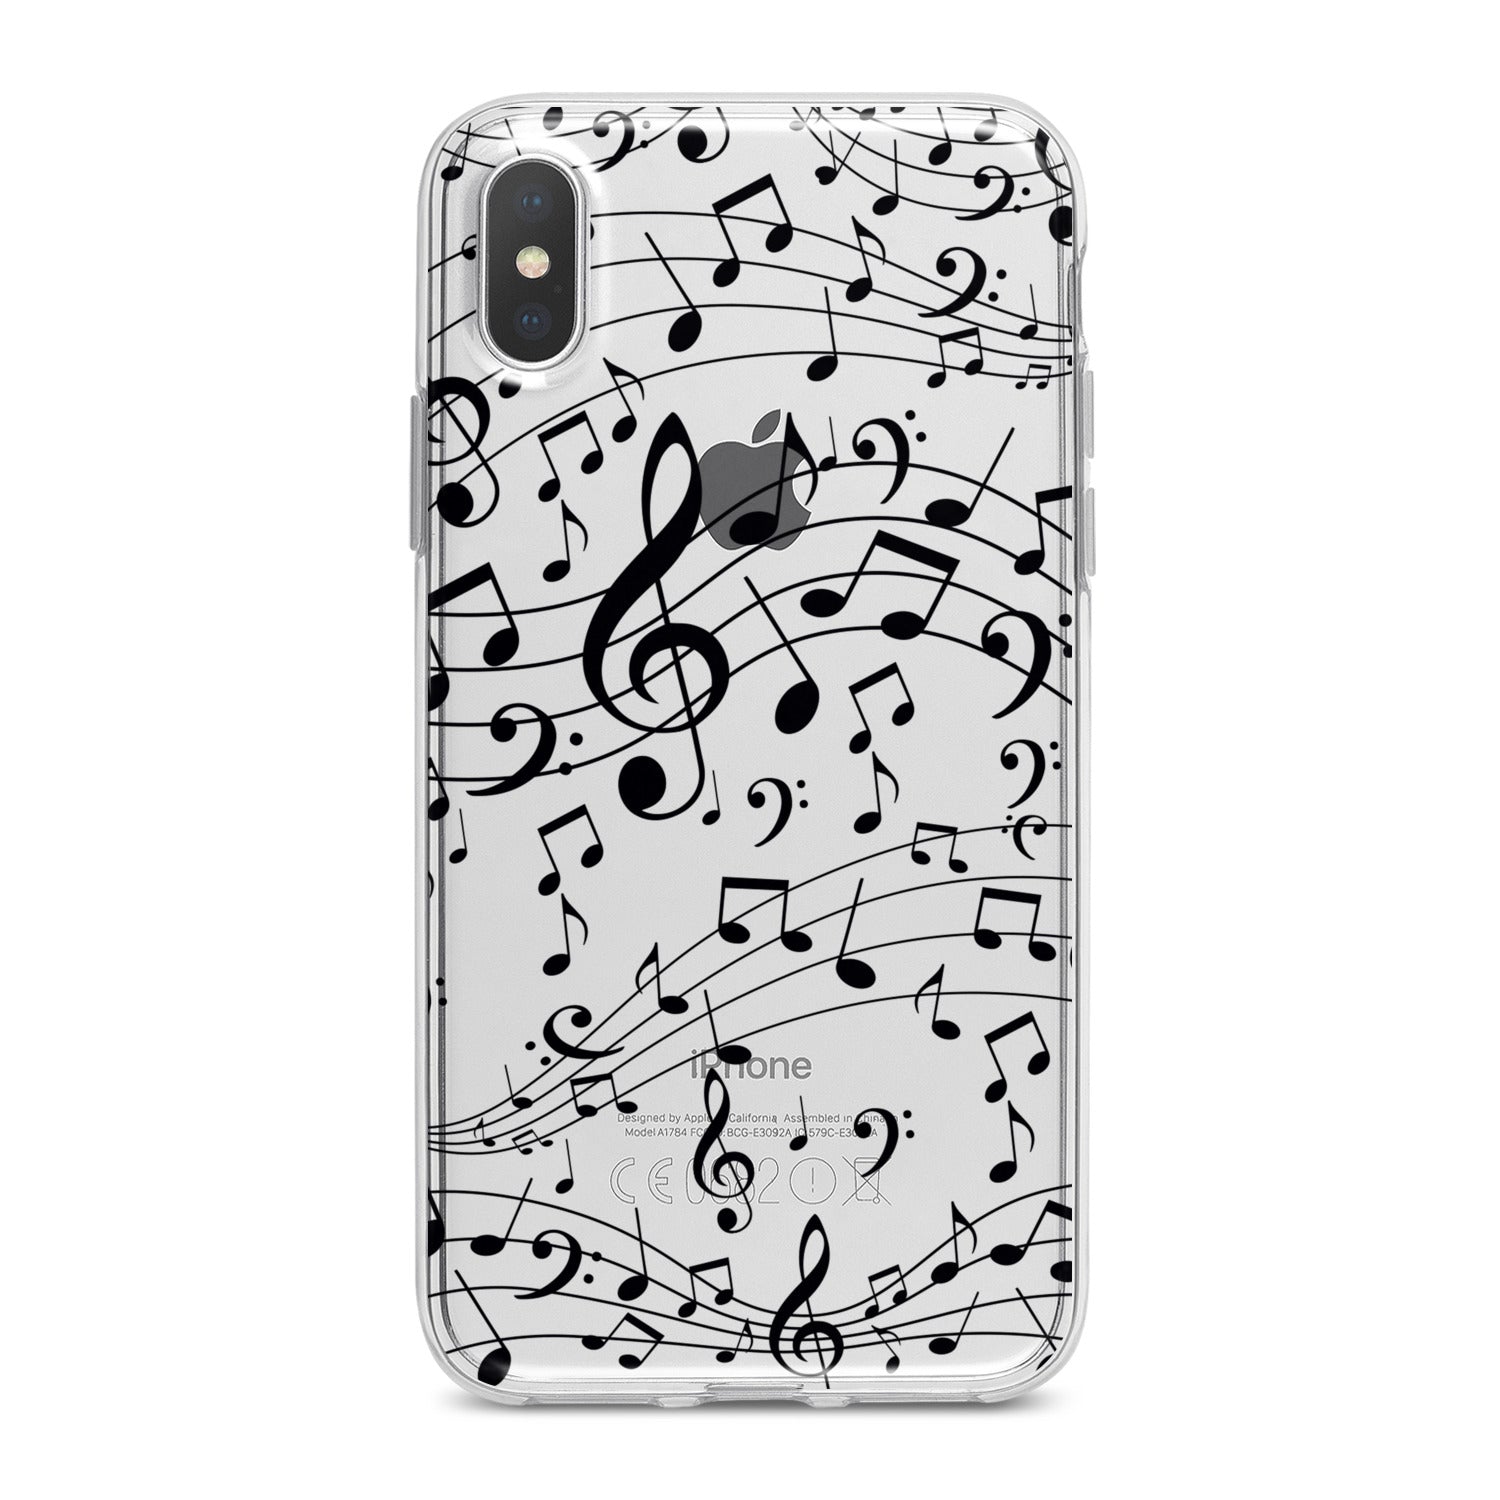 Lex Altern Black Treble Clef Phone Case for your iPhone & Android phone.